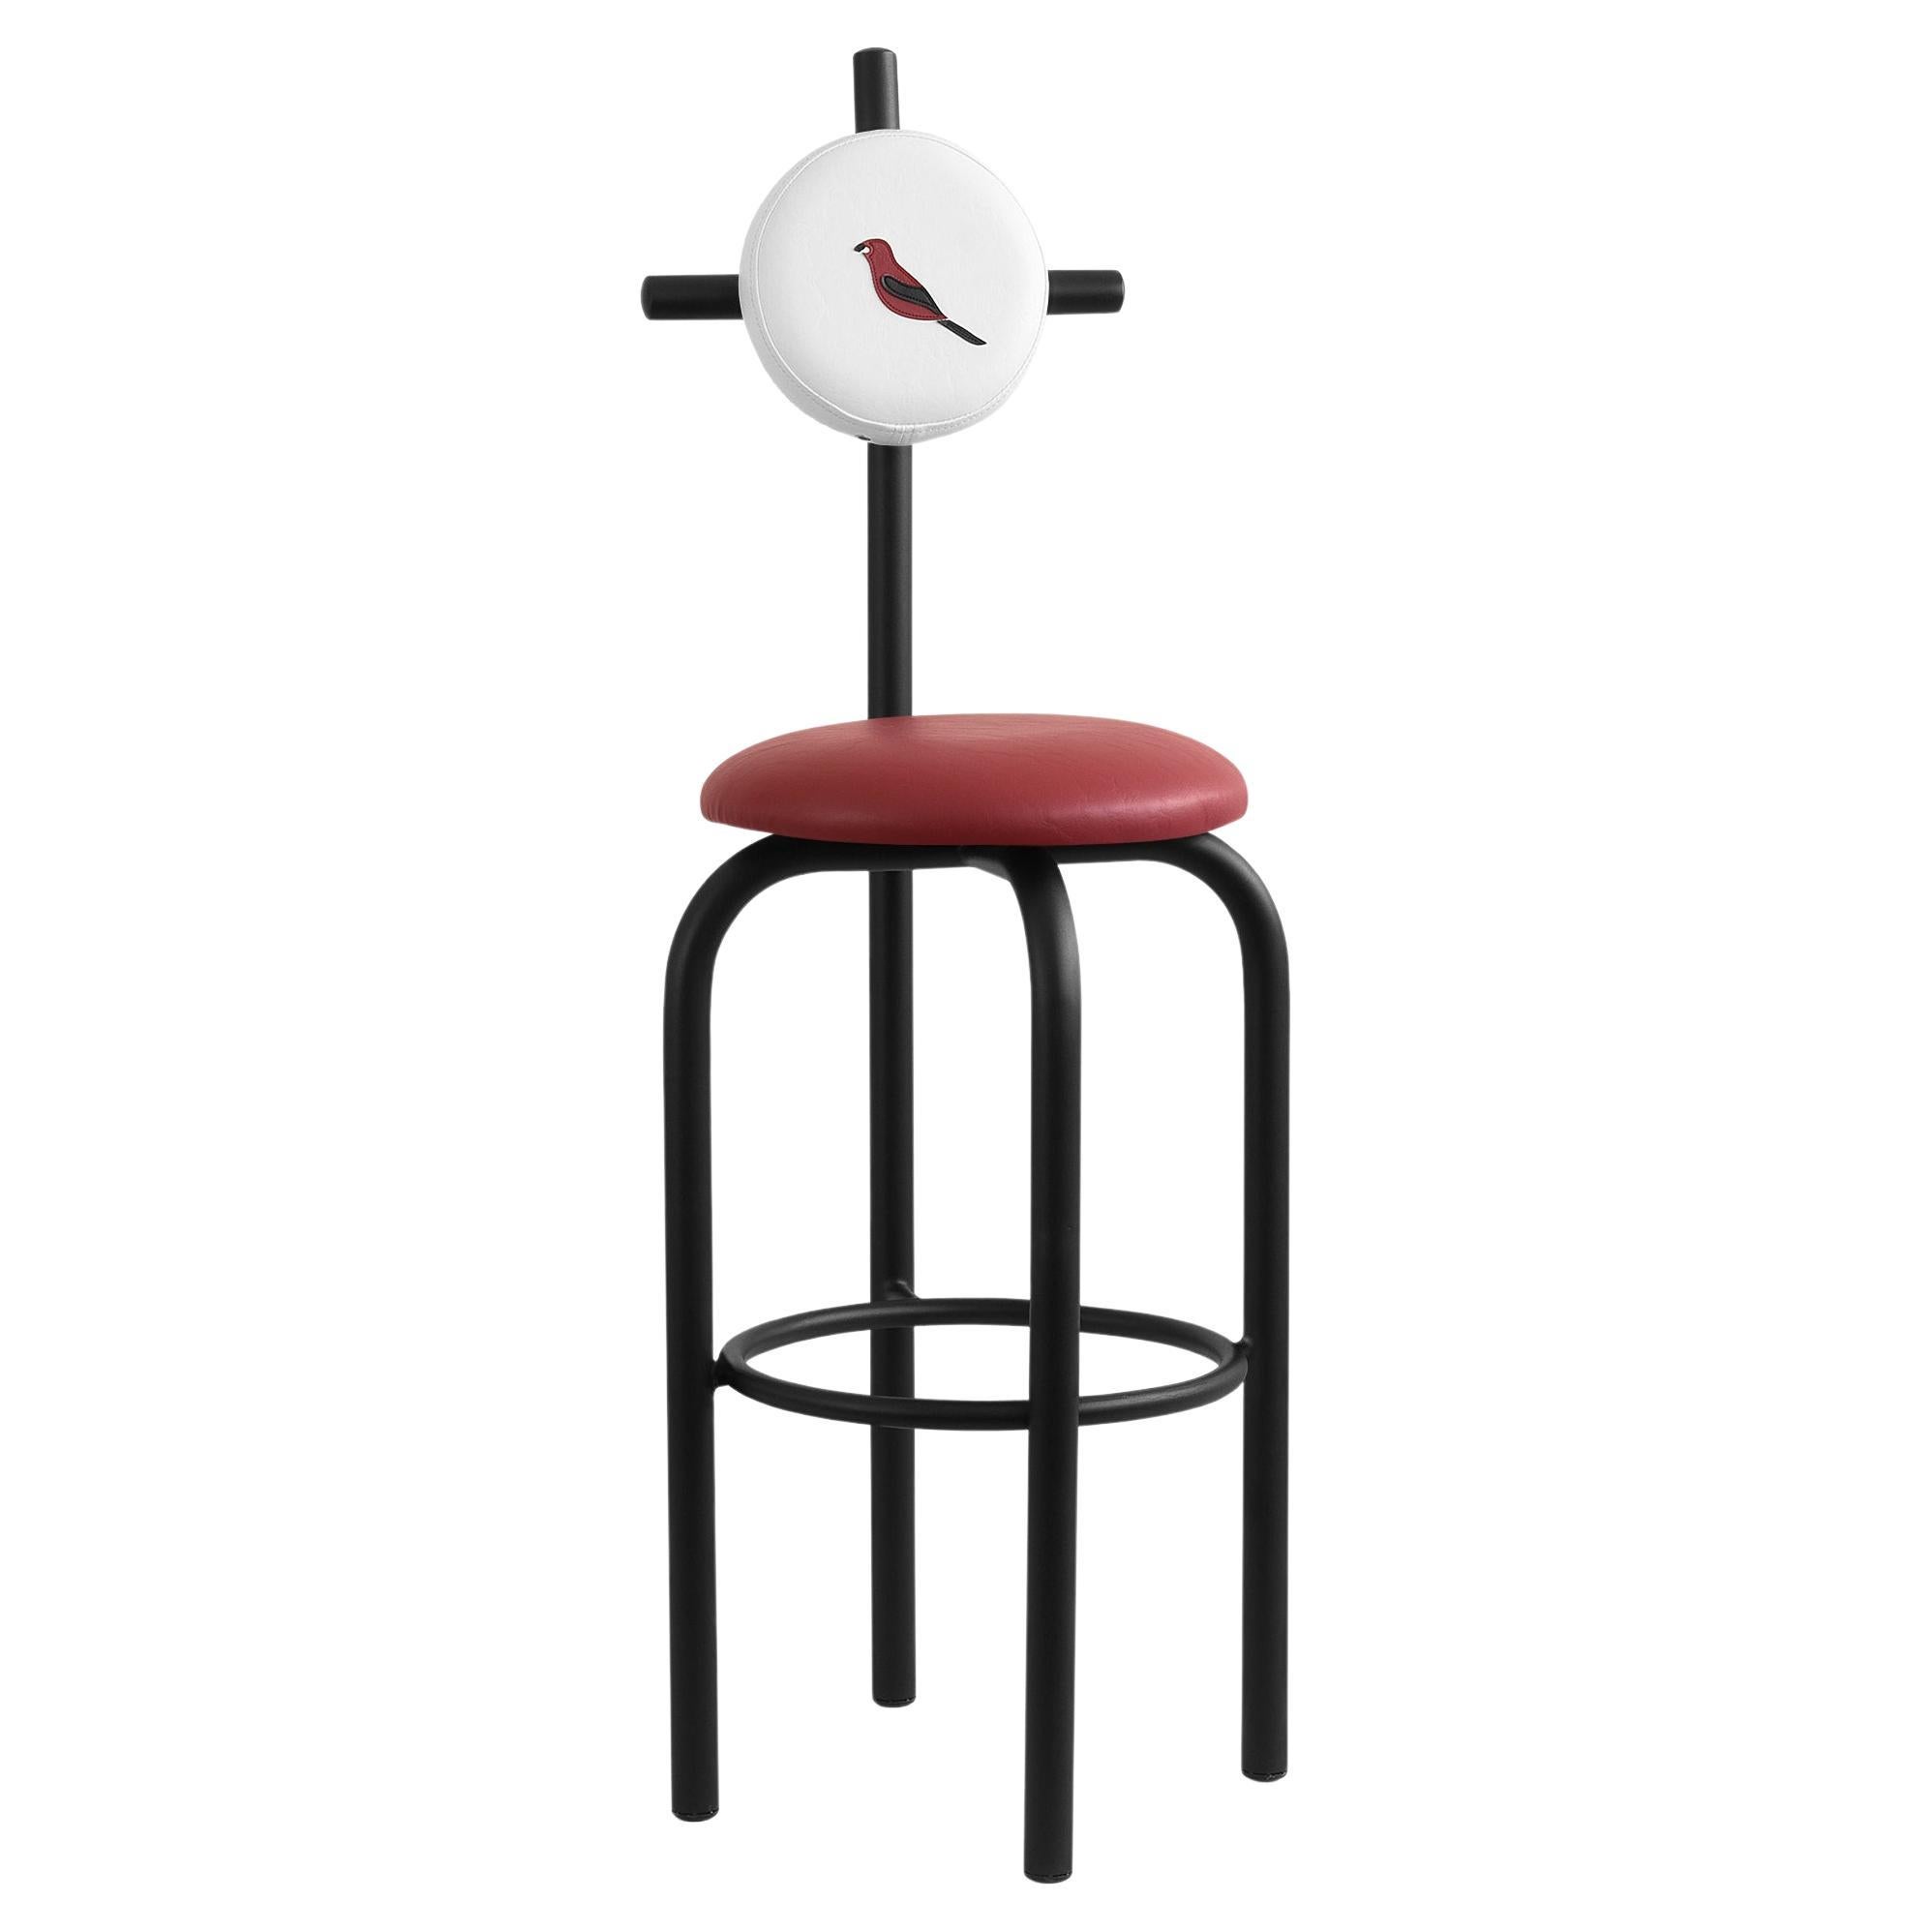 PK19 Impermeable Bar Stool, Red Seat & Black Metal Structure by Paulo Kobylka For Sale